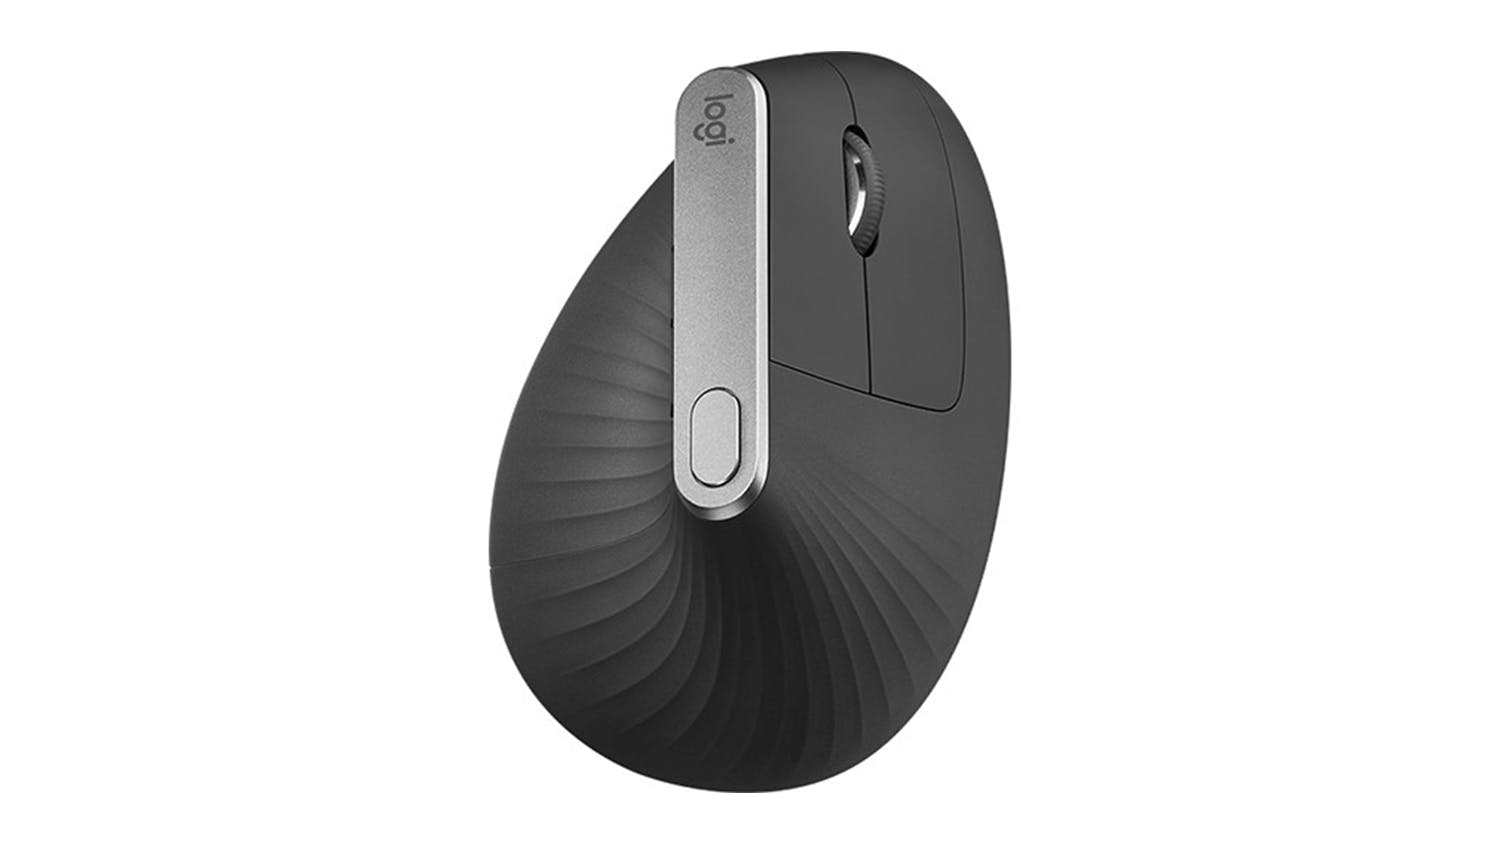 Logitech MX Vertical Mouse review: Looks strange but it's bloody